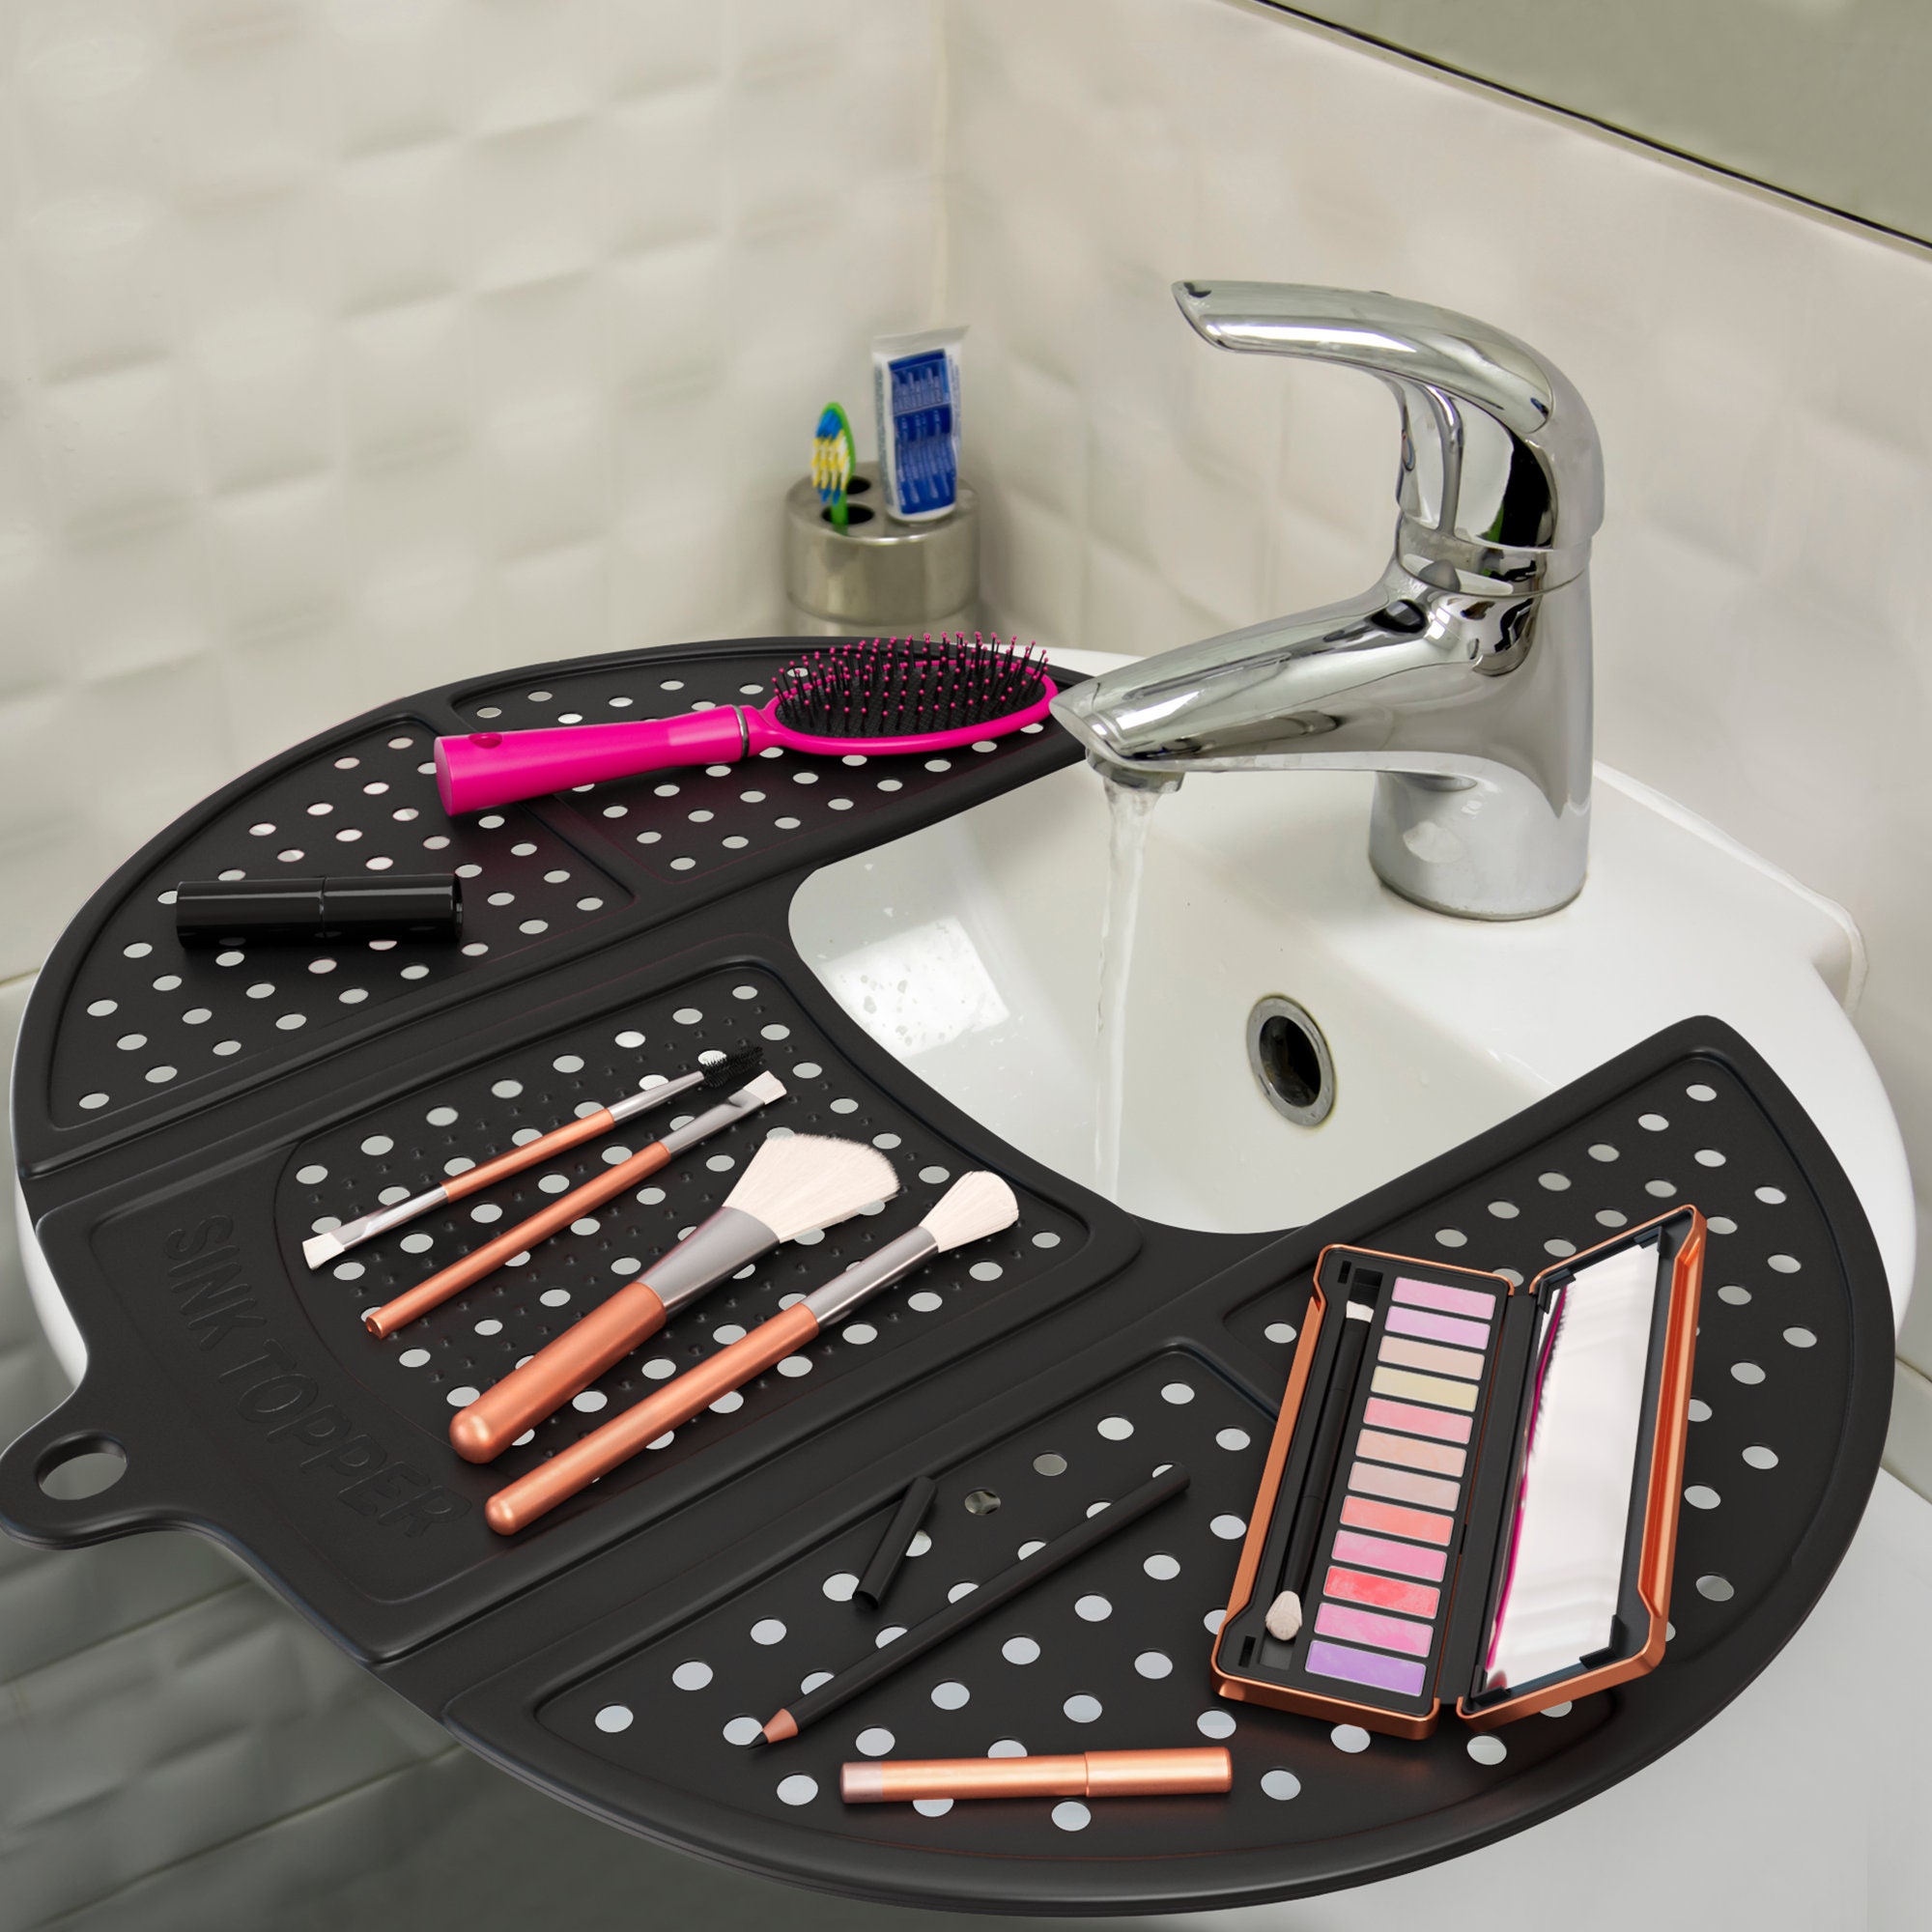 Bathroom Sink Cover for Counter Space. Makeup Mat for Vanity and Bathroom  Must Haves. Great for Rv's and as a Makeup Brush Cleaner. Standard 